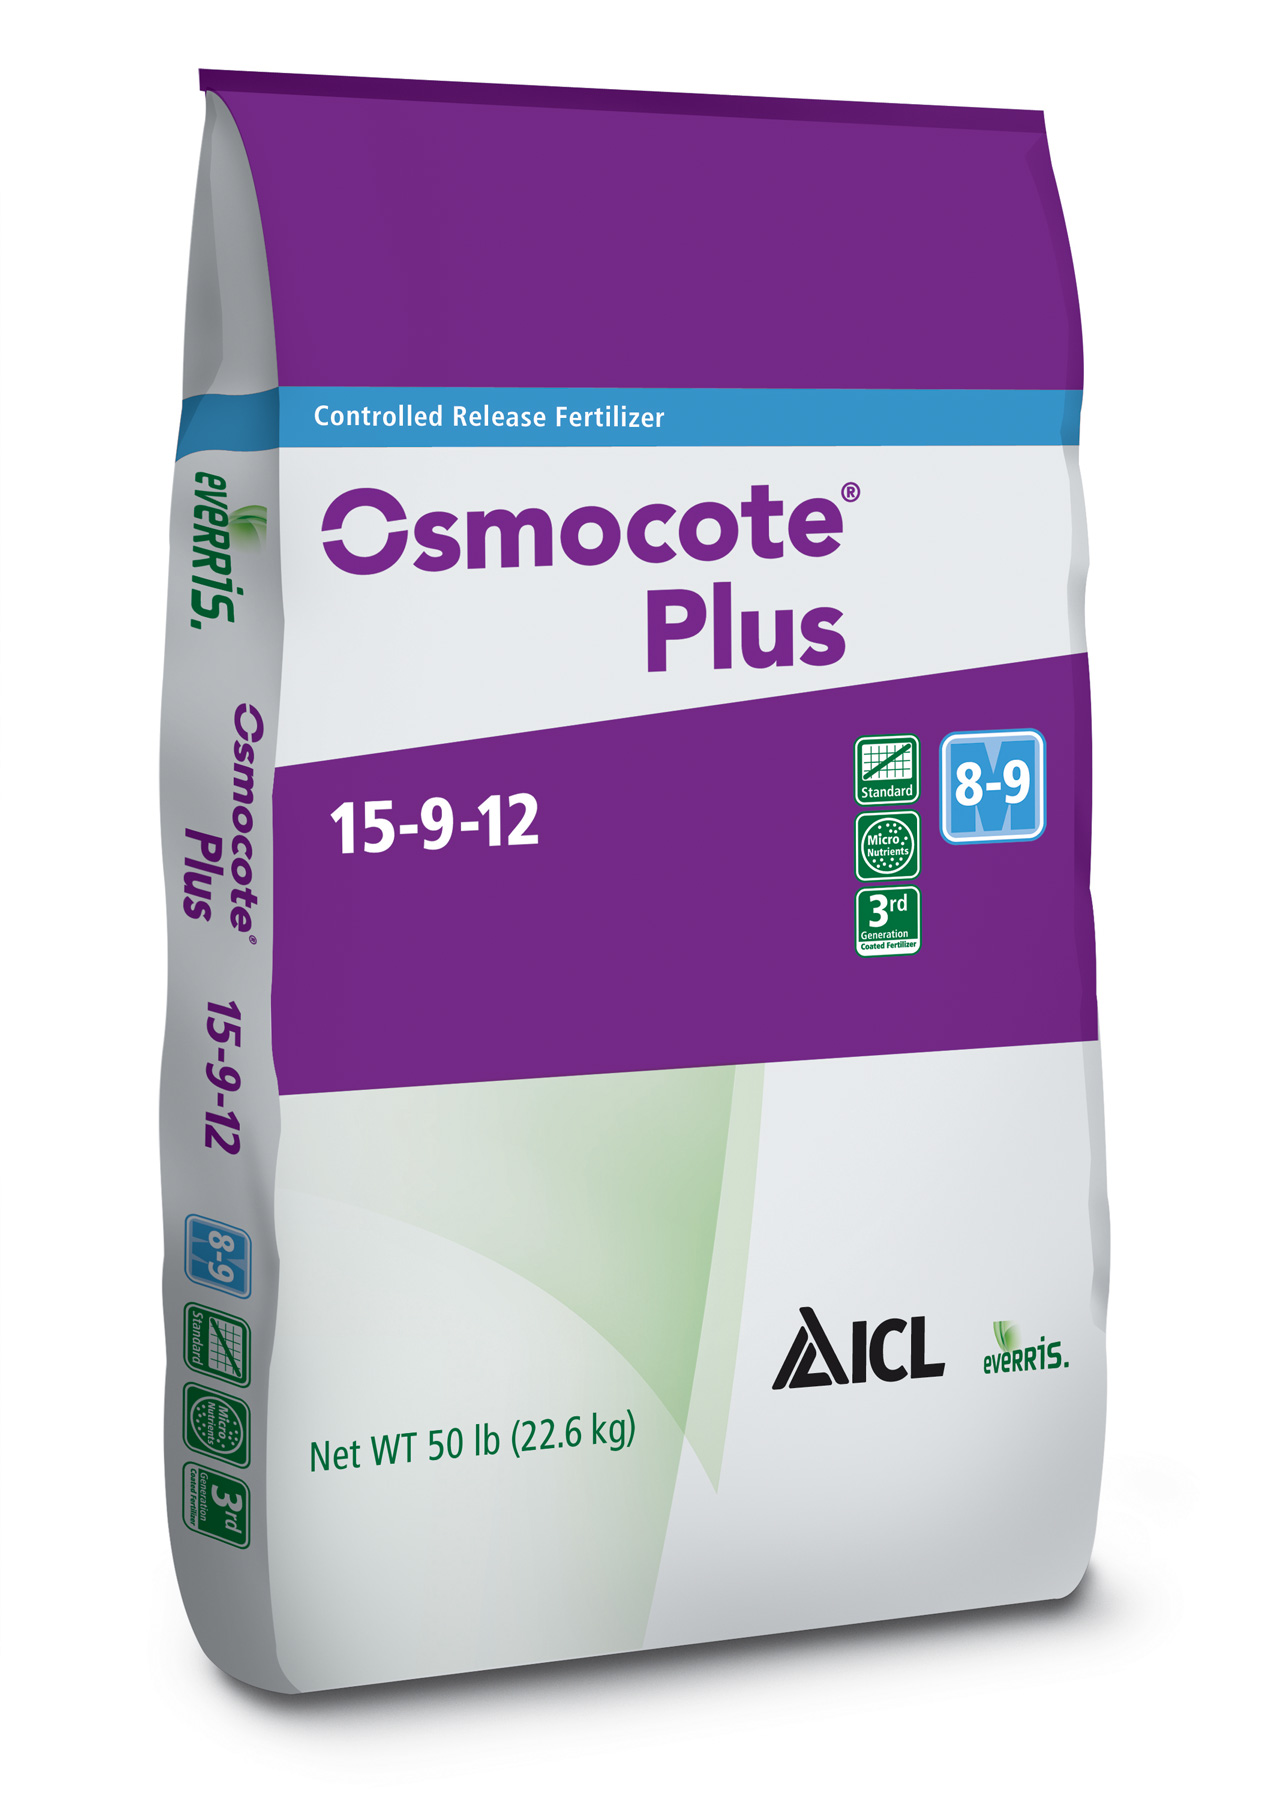 Osmocote® Plus 15-9-12 8-9M 50 lb Bag - Controlled Release CRF